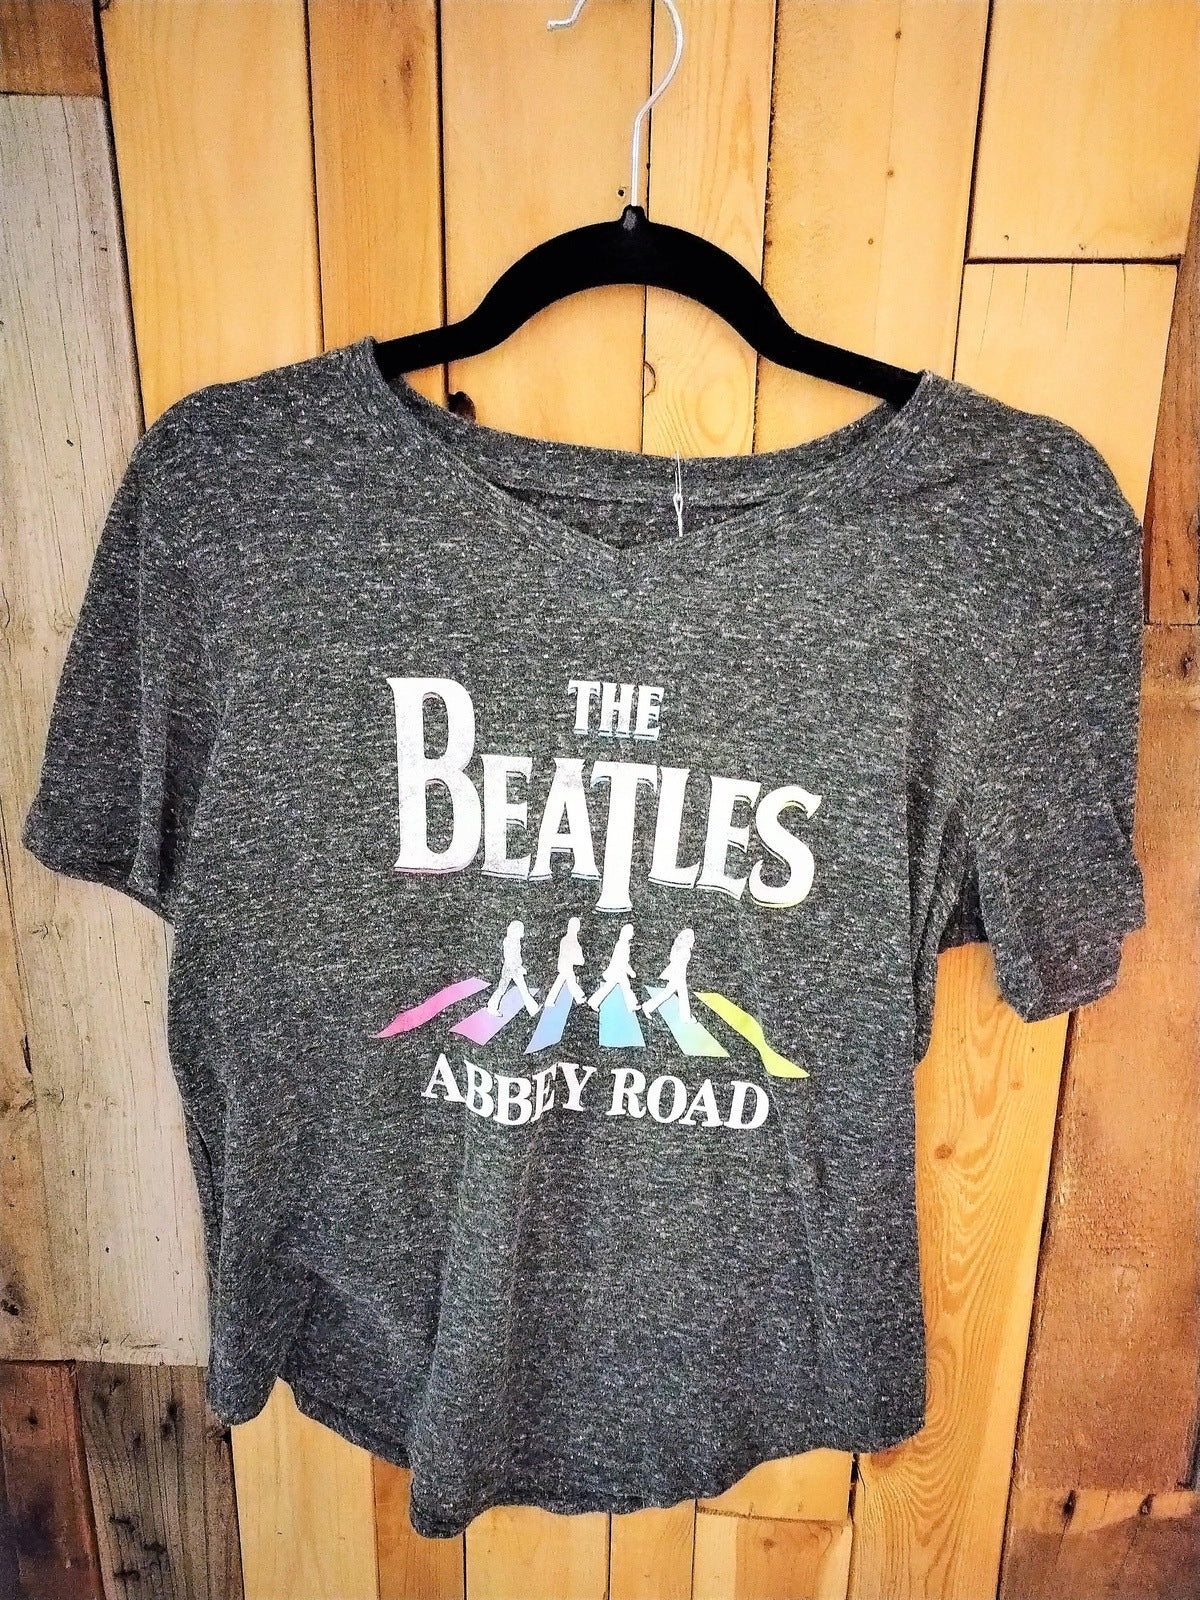 The Beatles Abbey Road Women's Tee Shirt Size Large